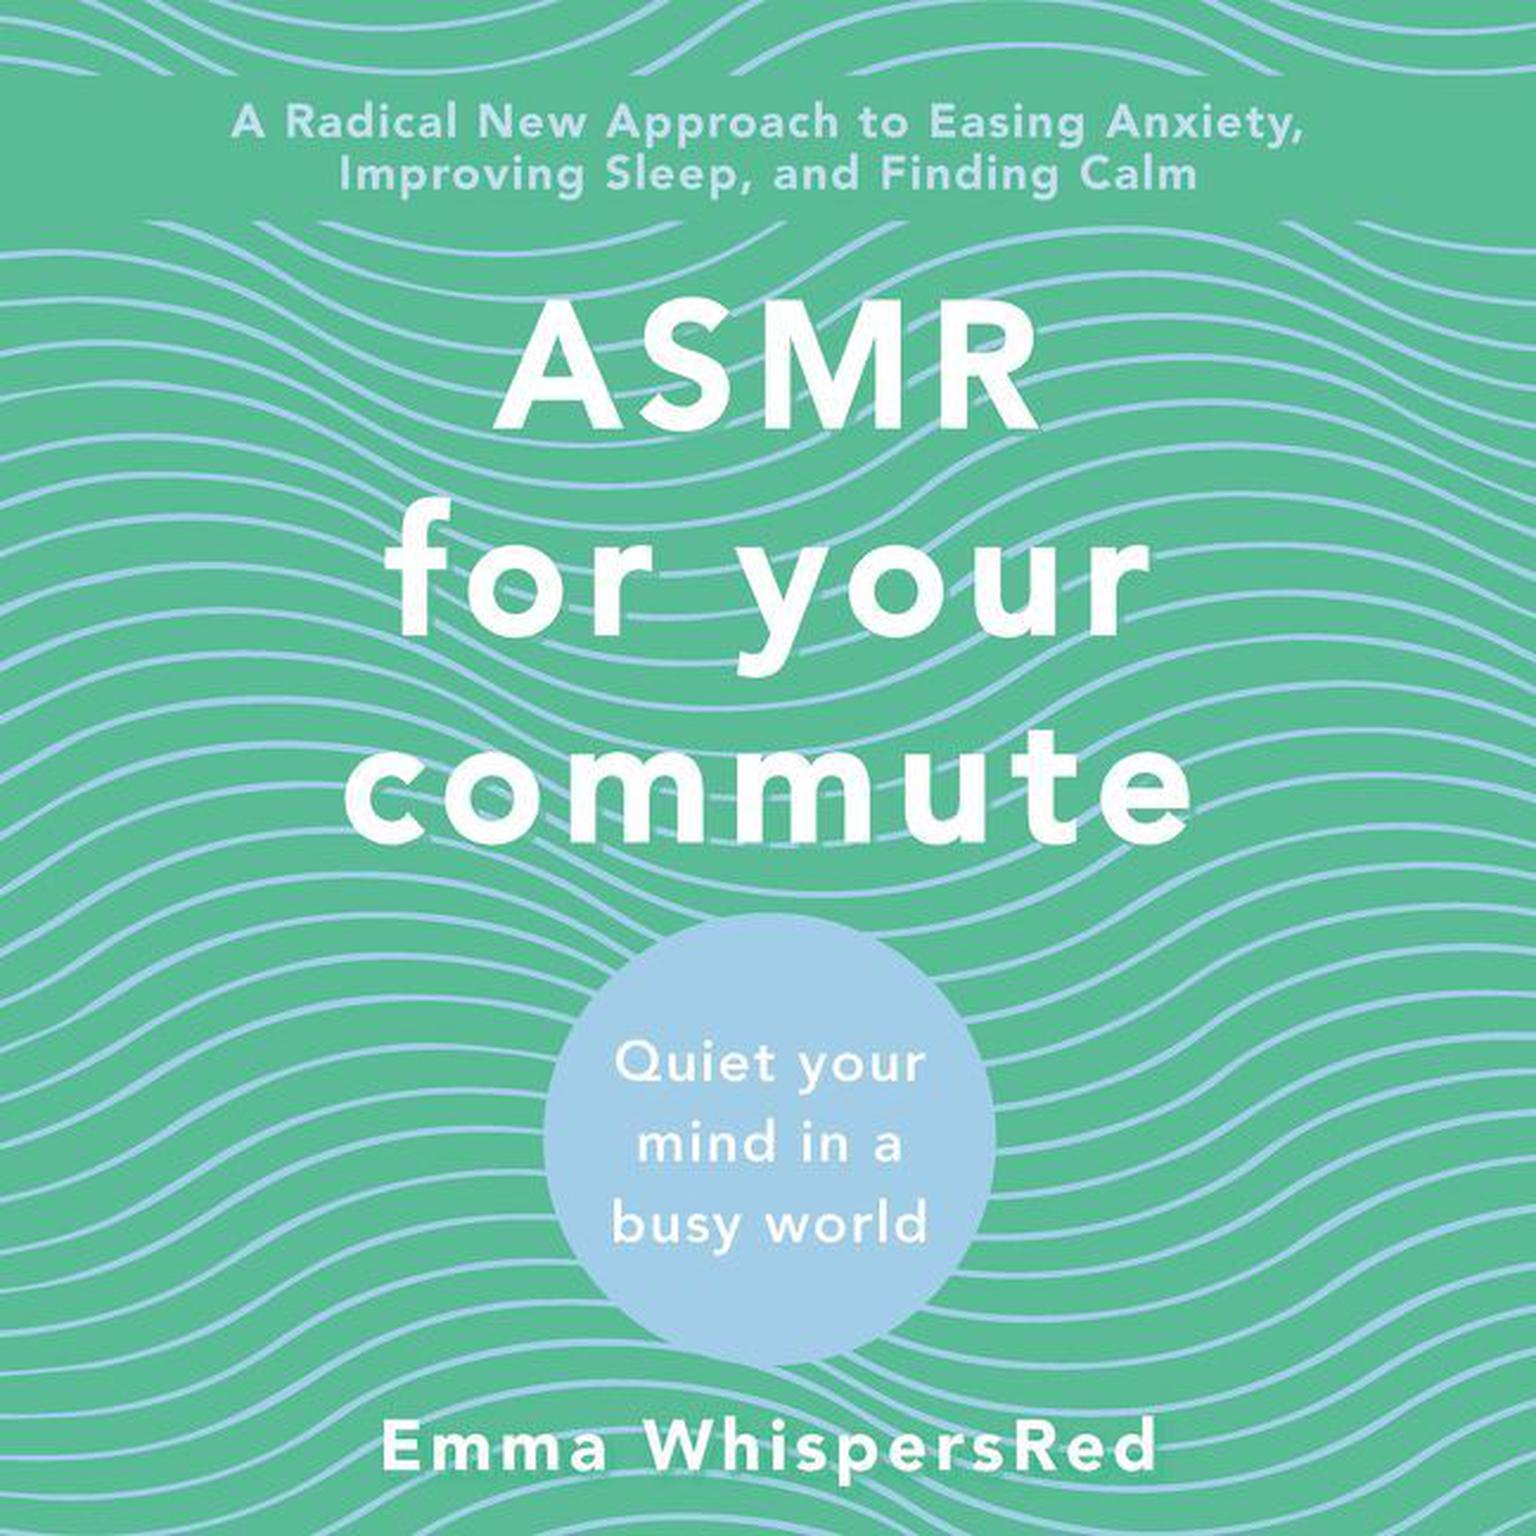 ASMR for Your Commute: Quiet Your Mind in a Busy World Audiobook, by Emma WhispersRed